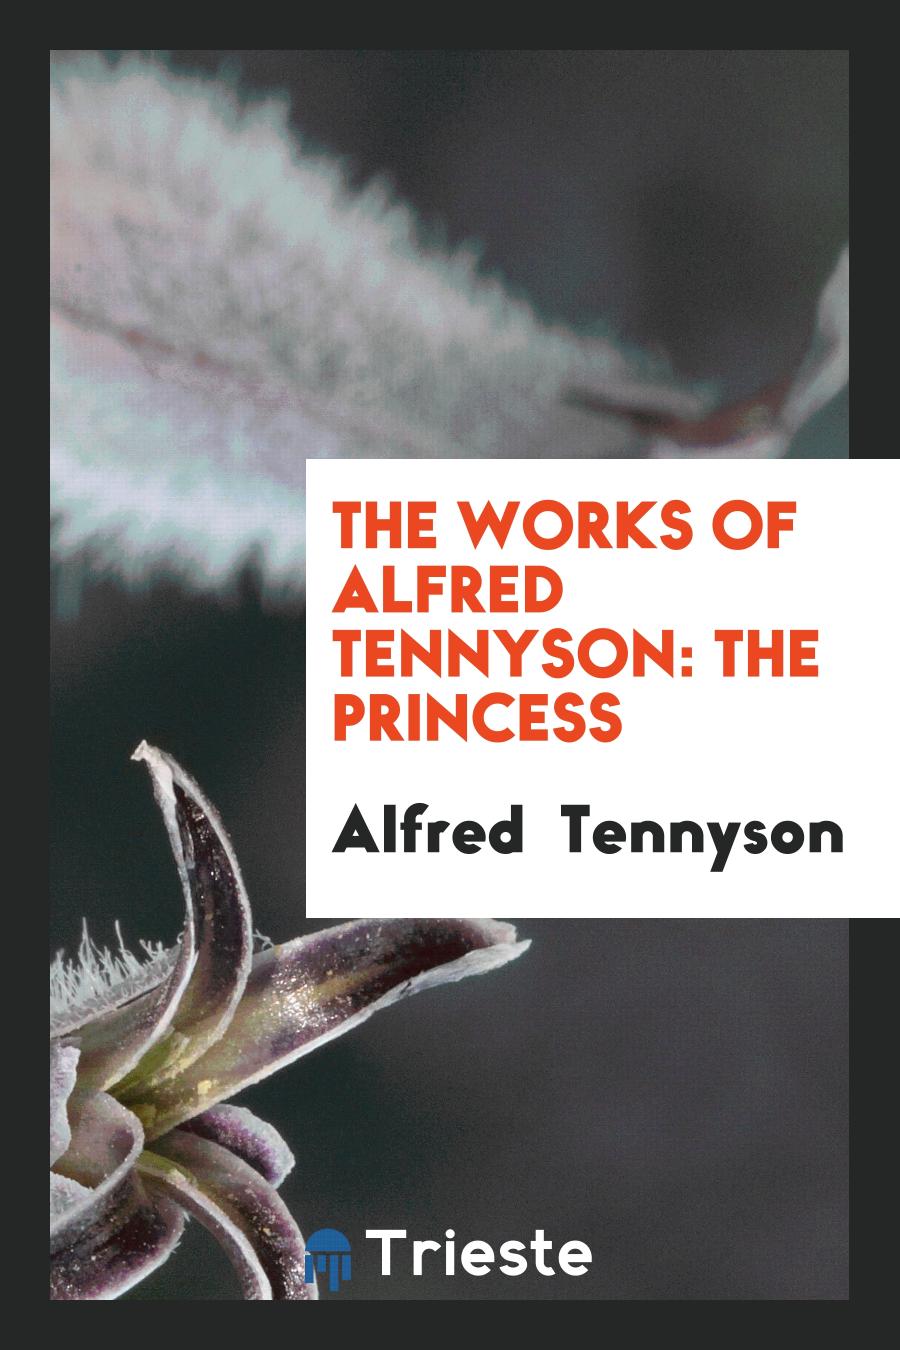 The Works of Alfred Tennyson: The Princess